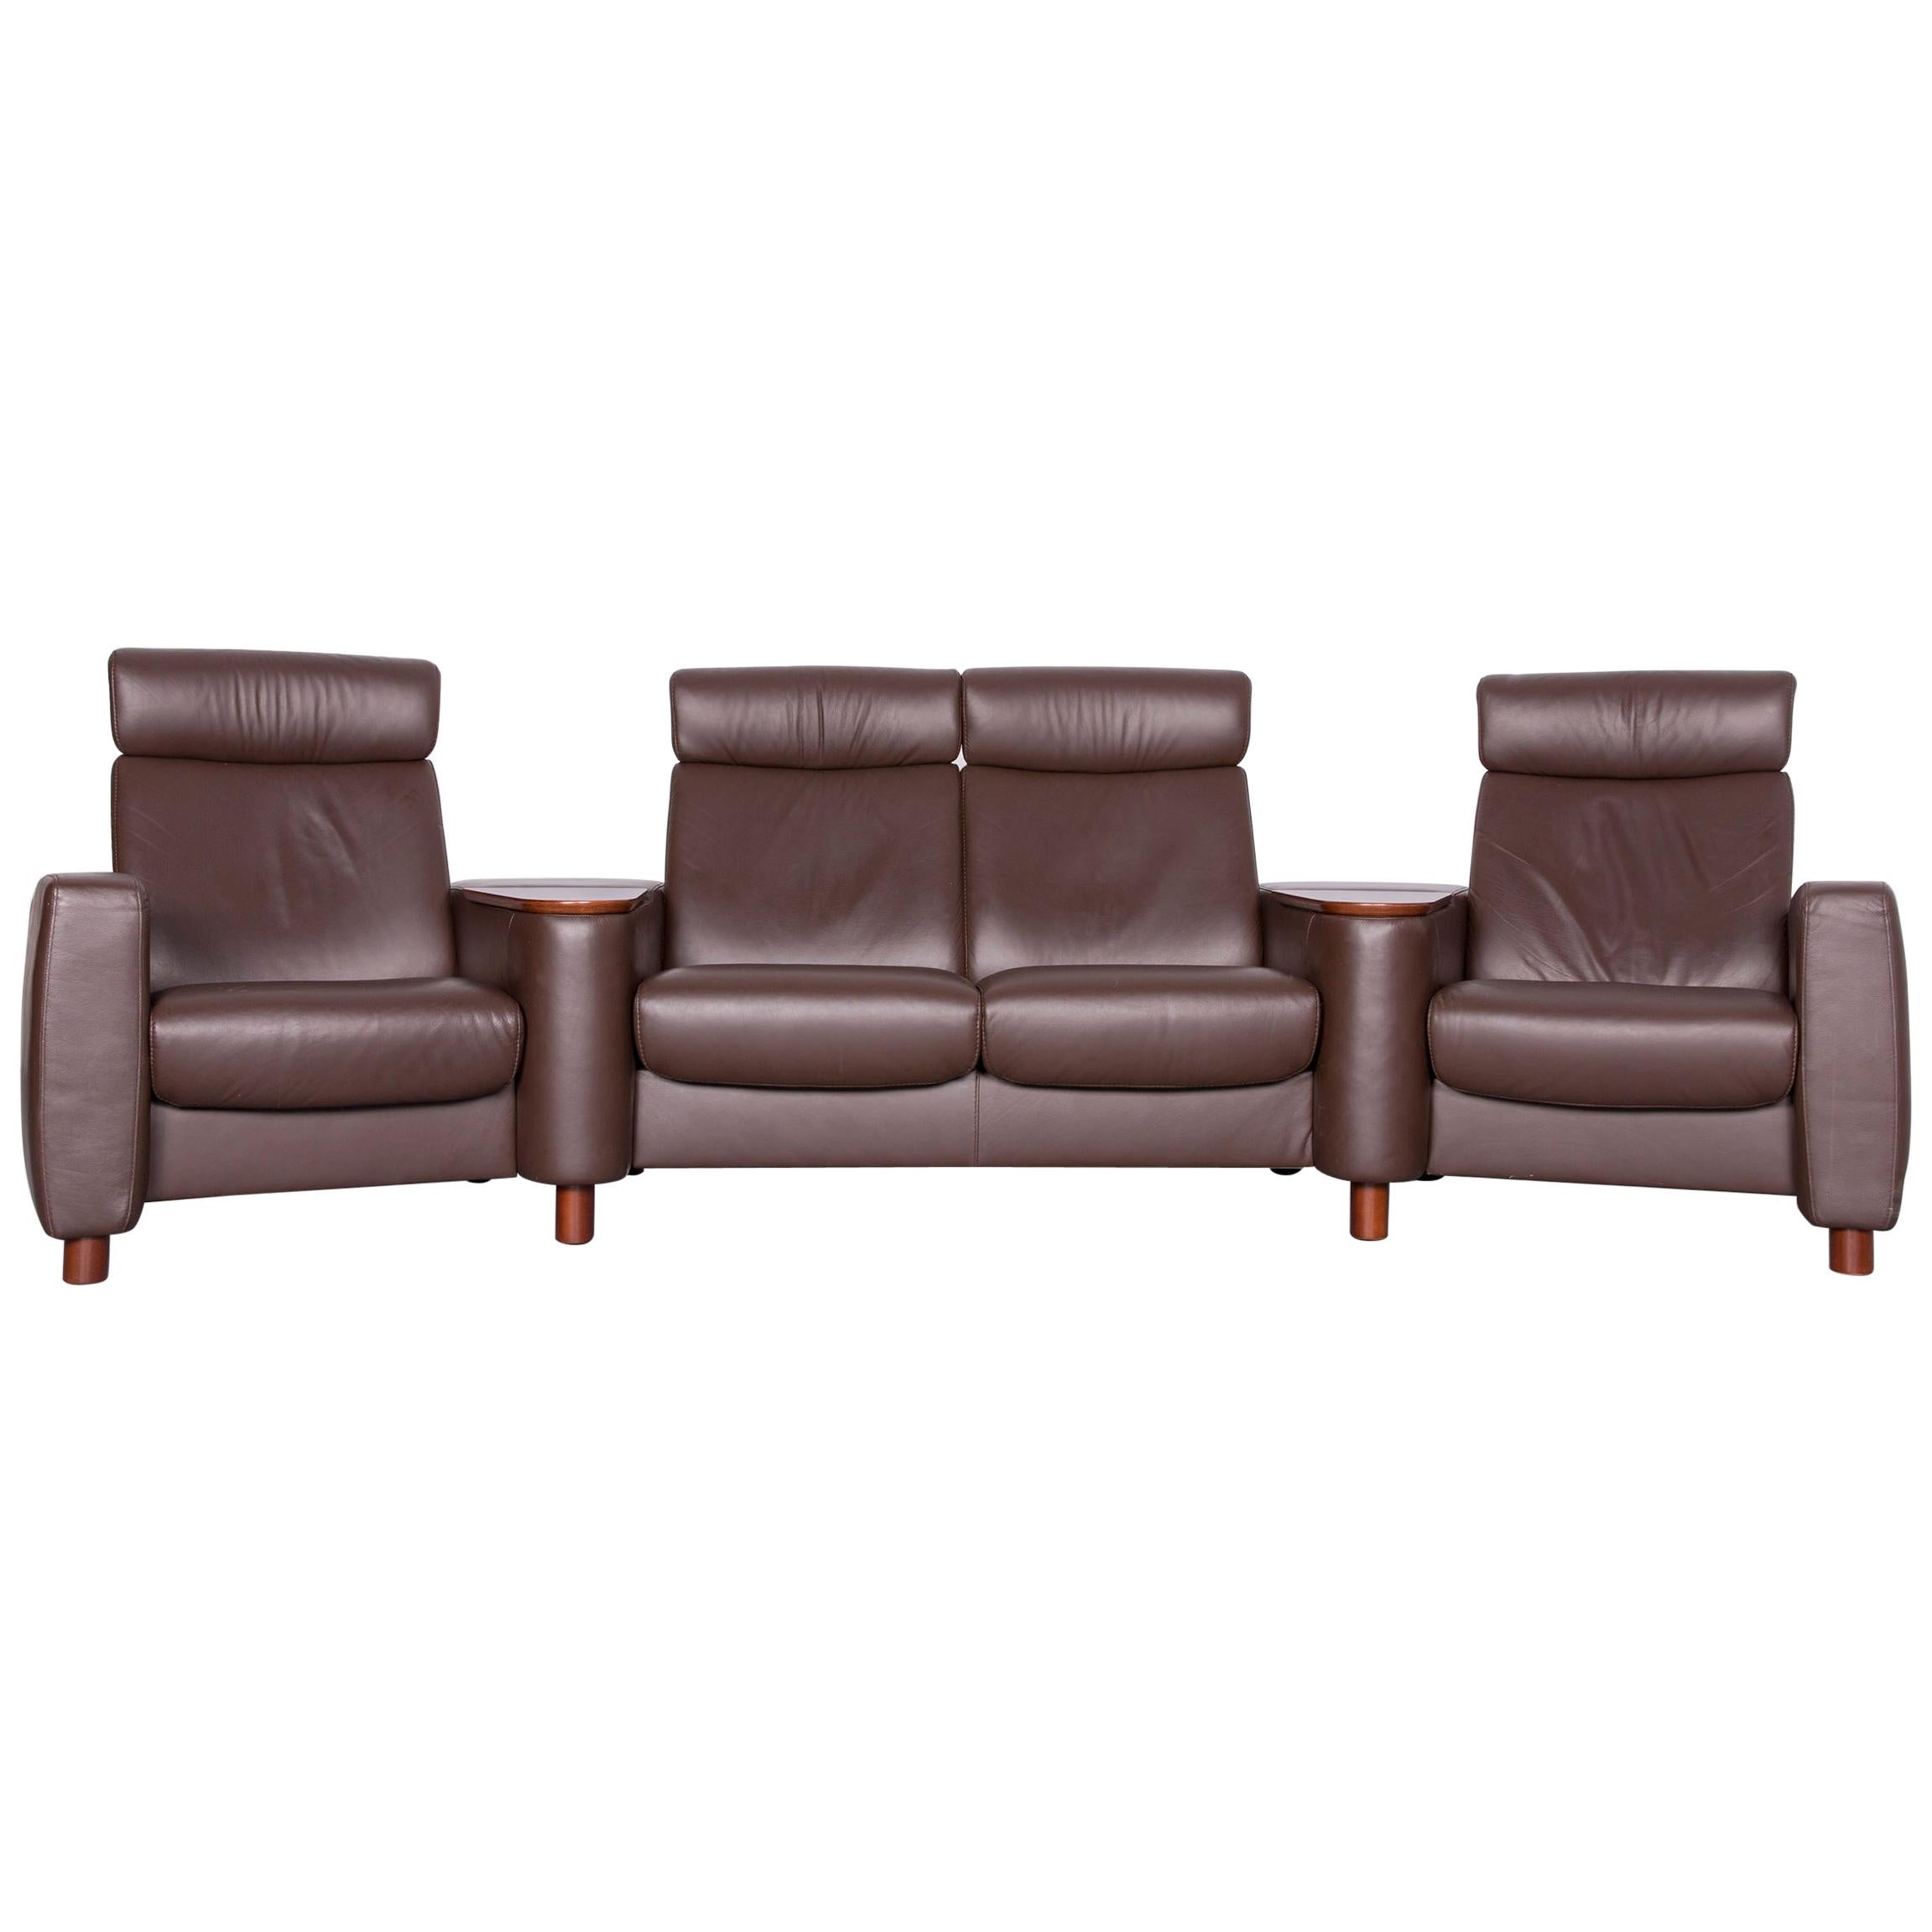 Ekornes Stressless Arion Sofa Brown Leather Four-Seat Couch with Function